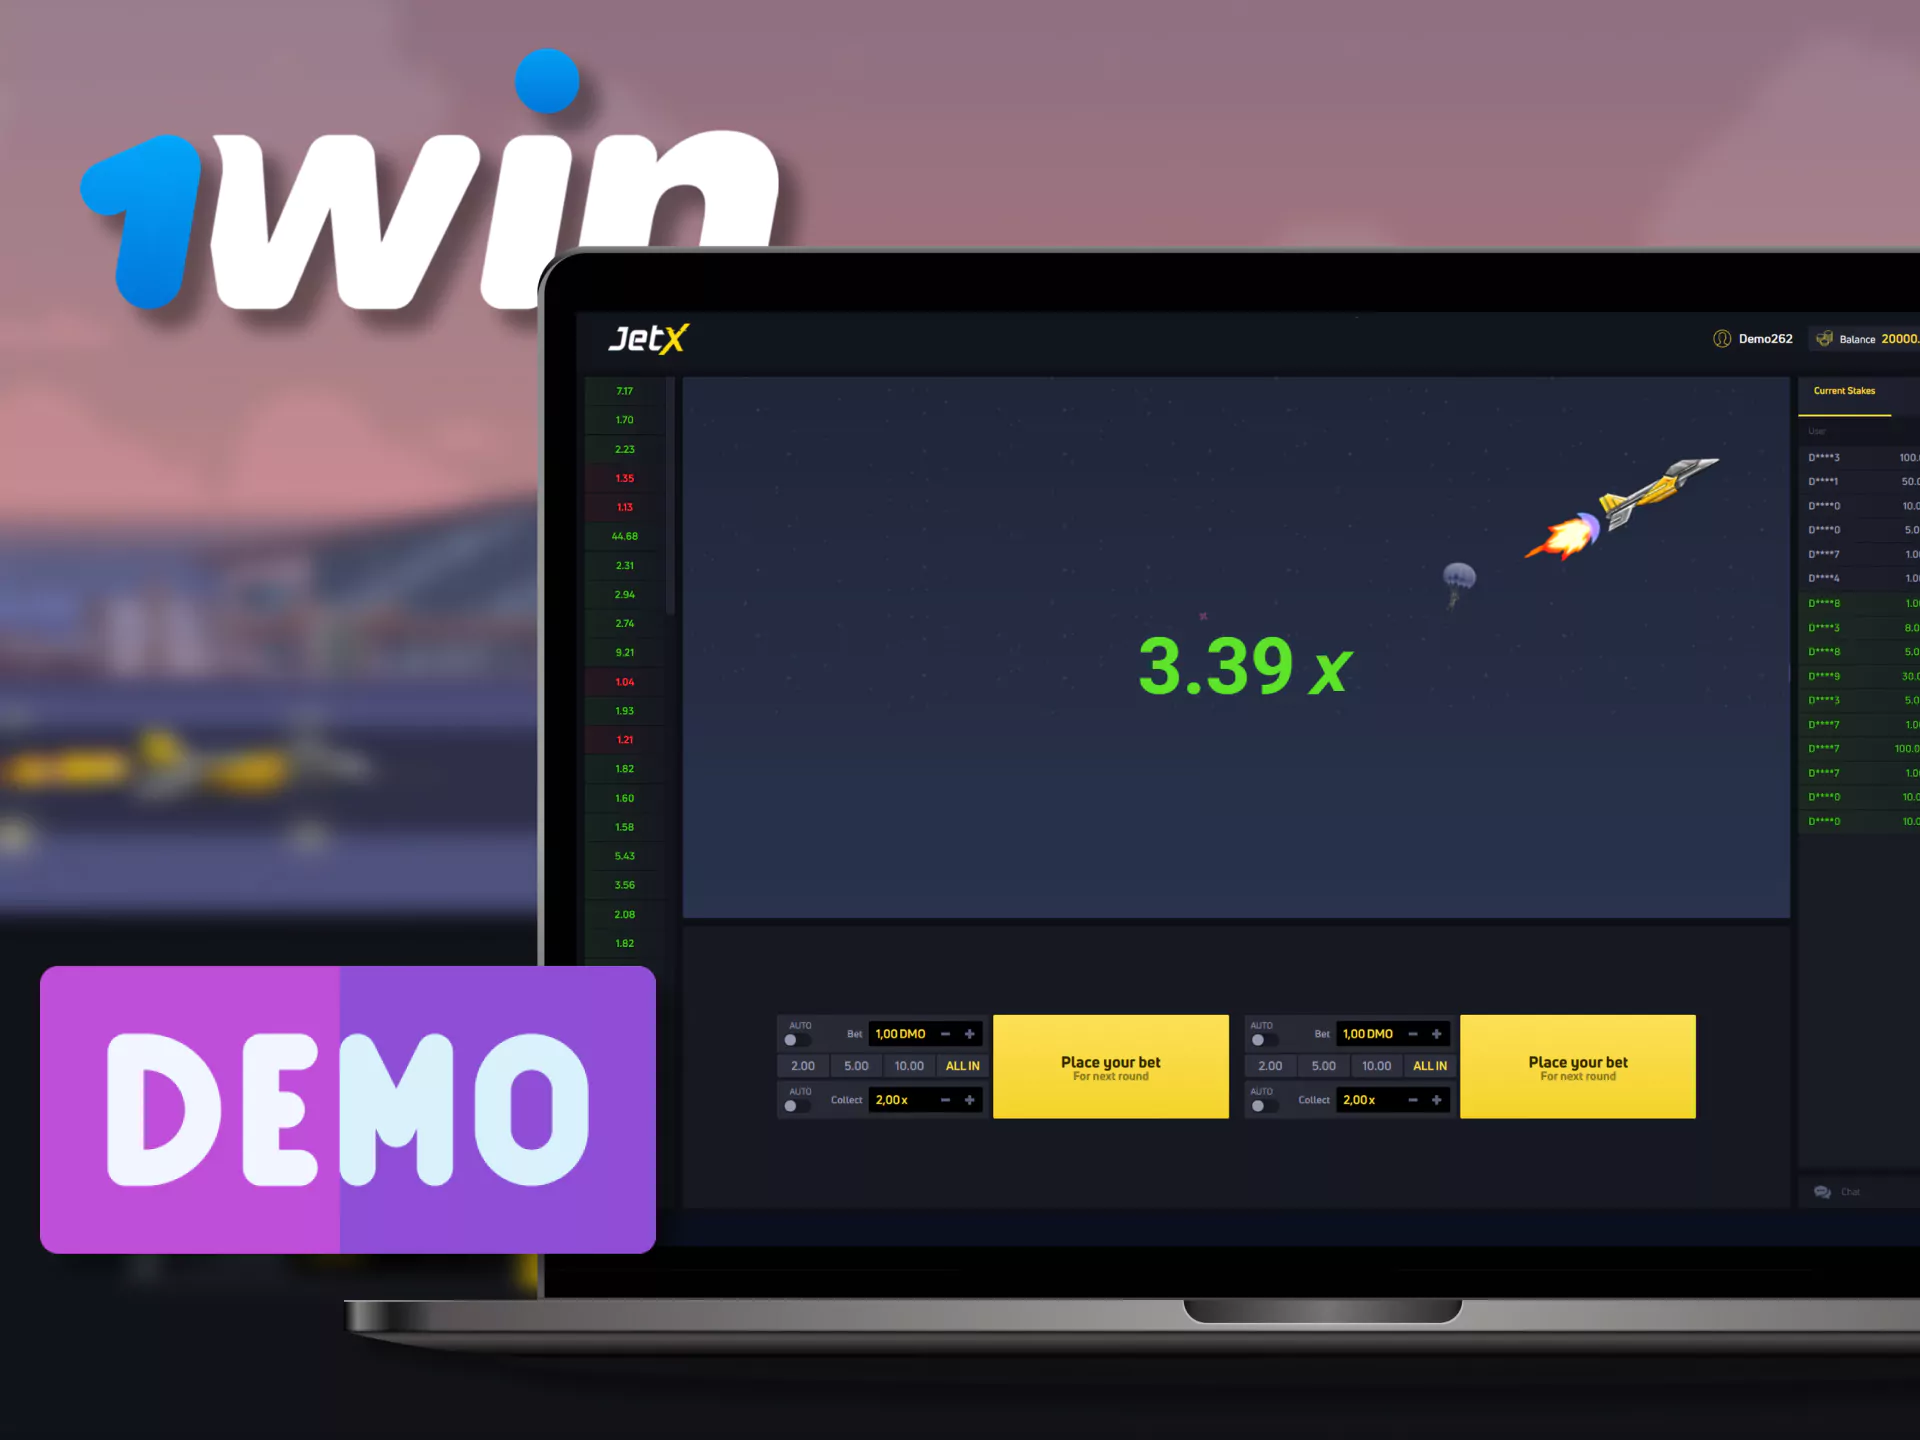 On 1Win, try playing the JetX demo game.